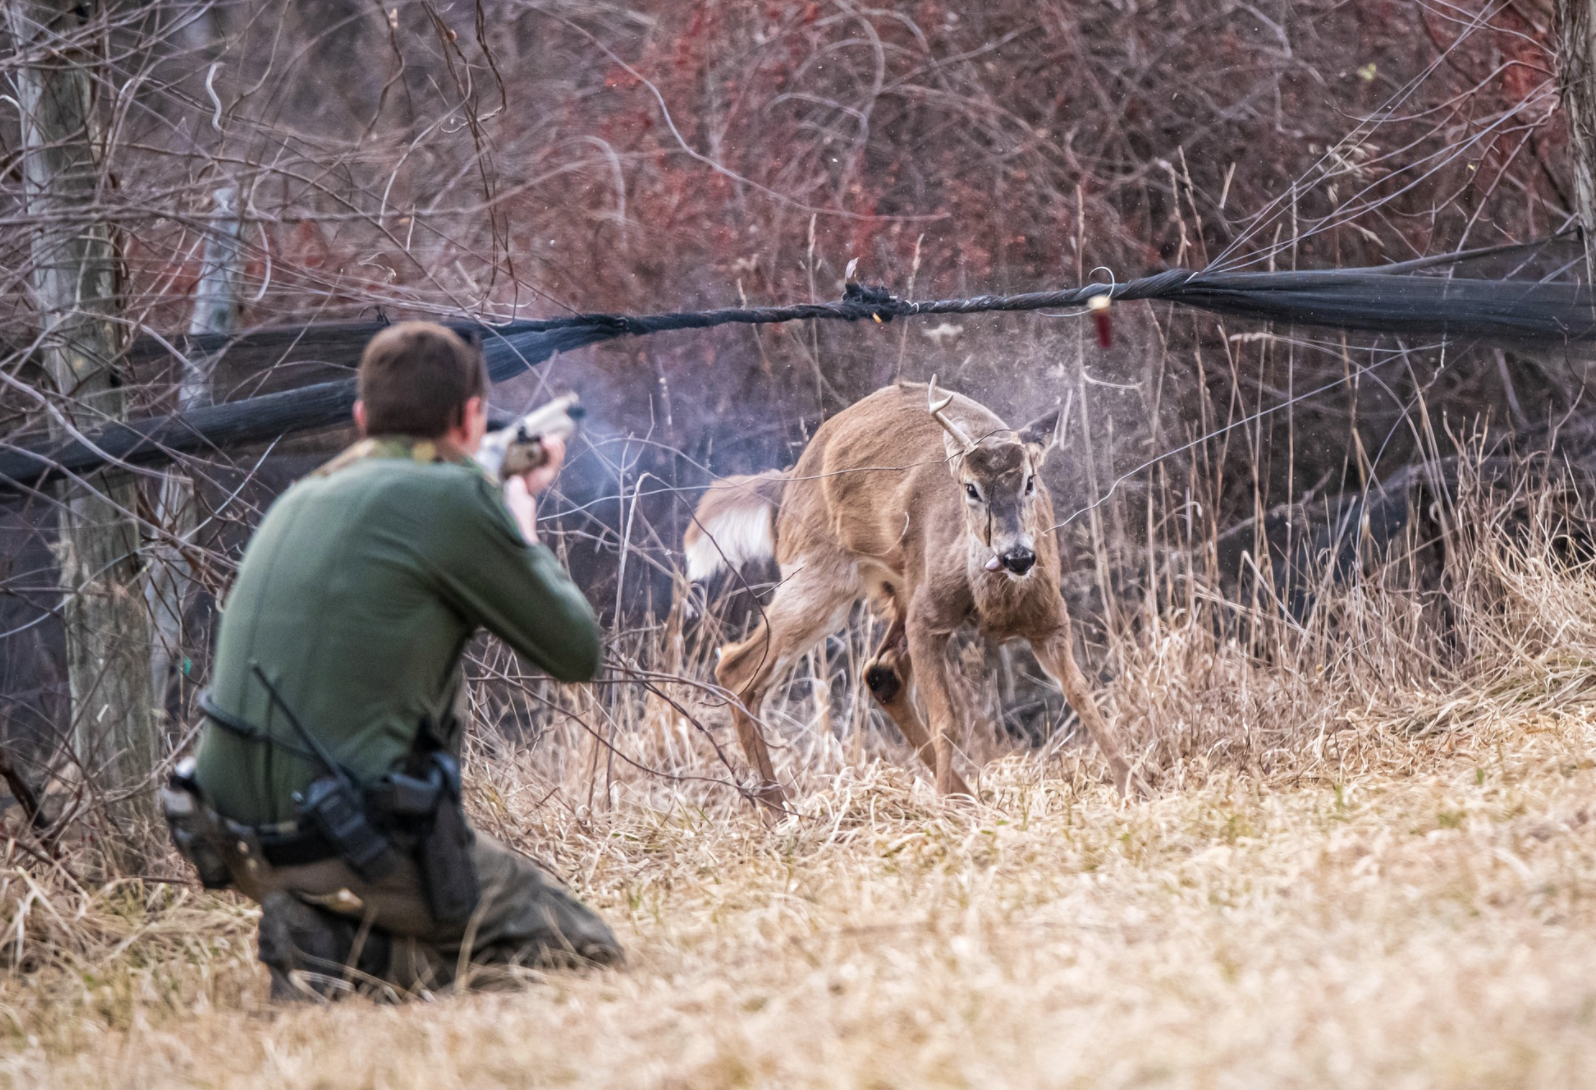 Pennsylvania Game Warden Frees a Forkhorn Buck Tangled in a Net by Shooting Its Antler